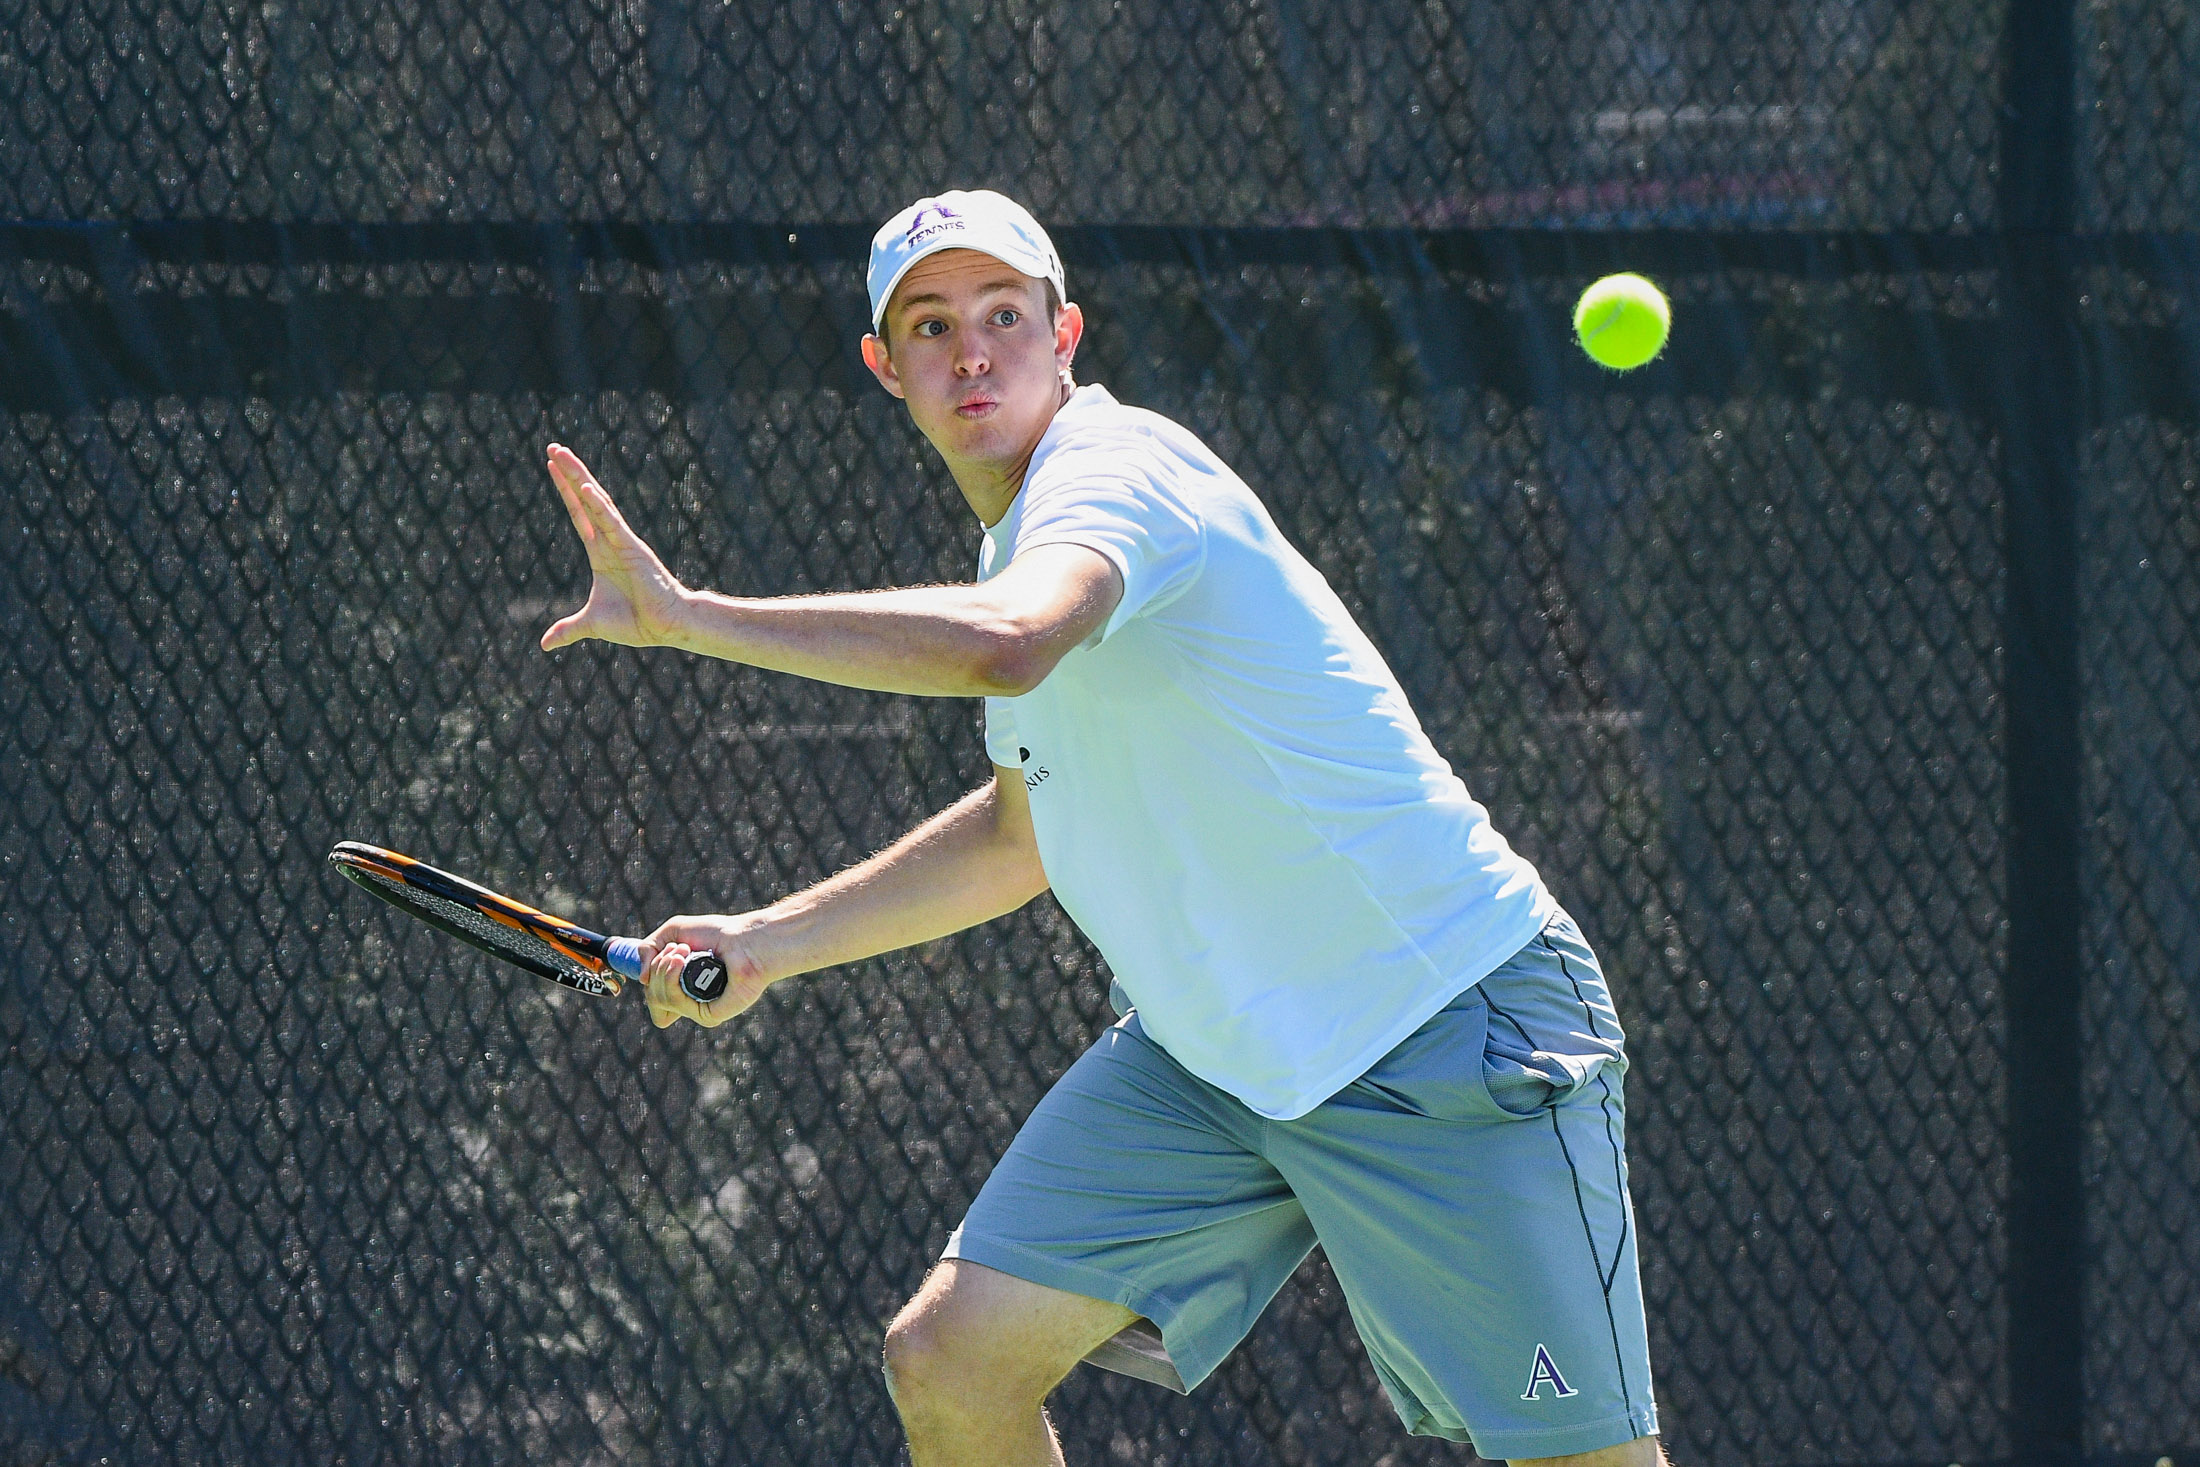 Men's Tennis, Rocked by Departures, Searches for Consistent Showings